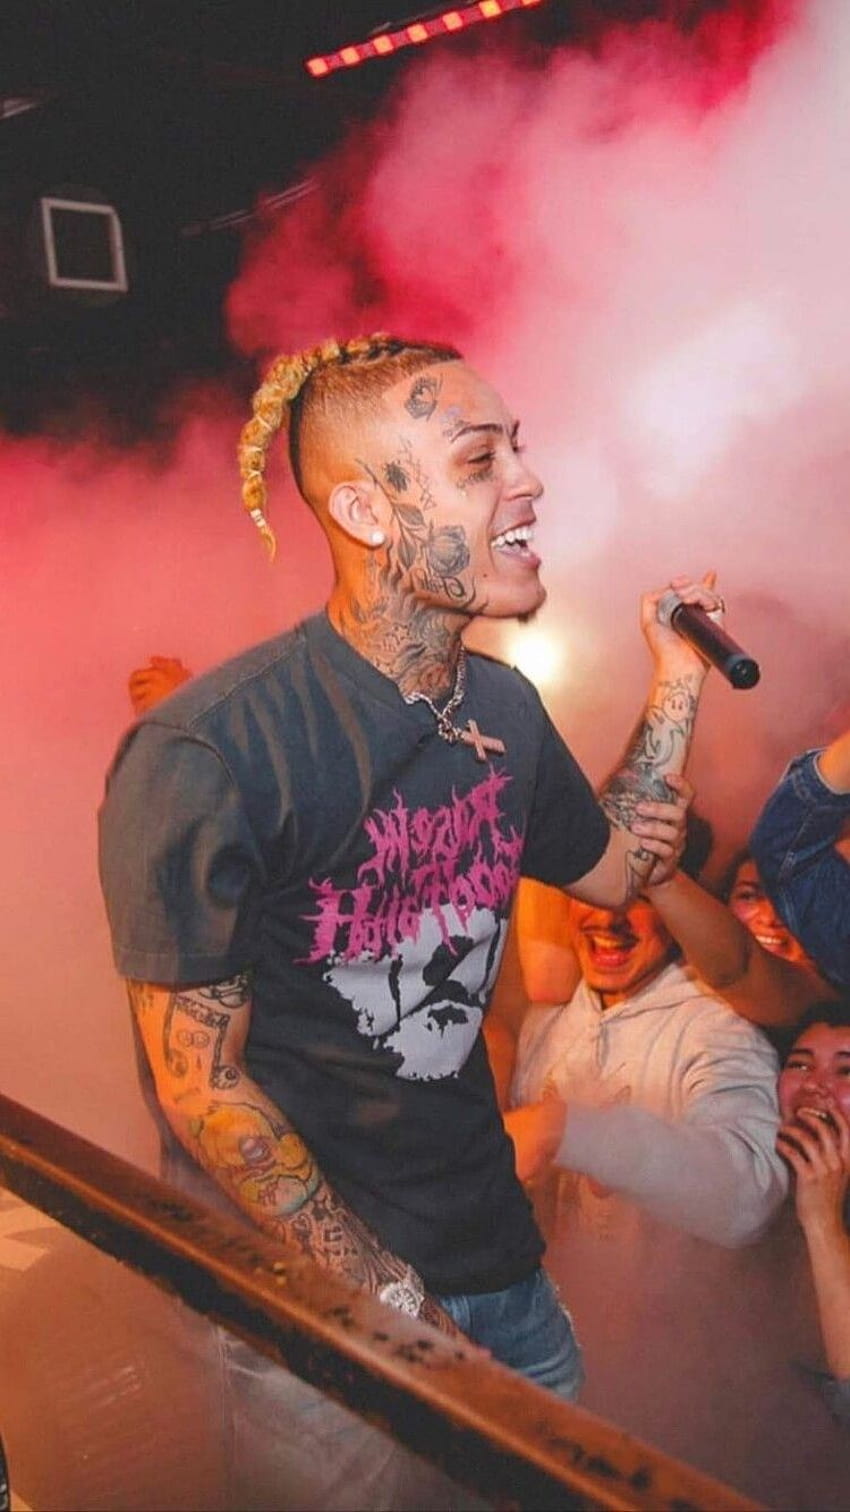 Aggregate 60+ lil skies wallpaper best - in.cdgdbentre